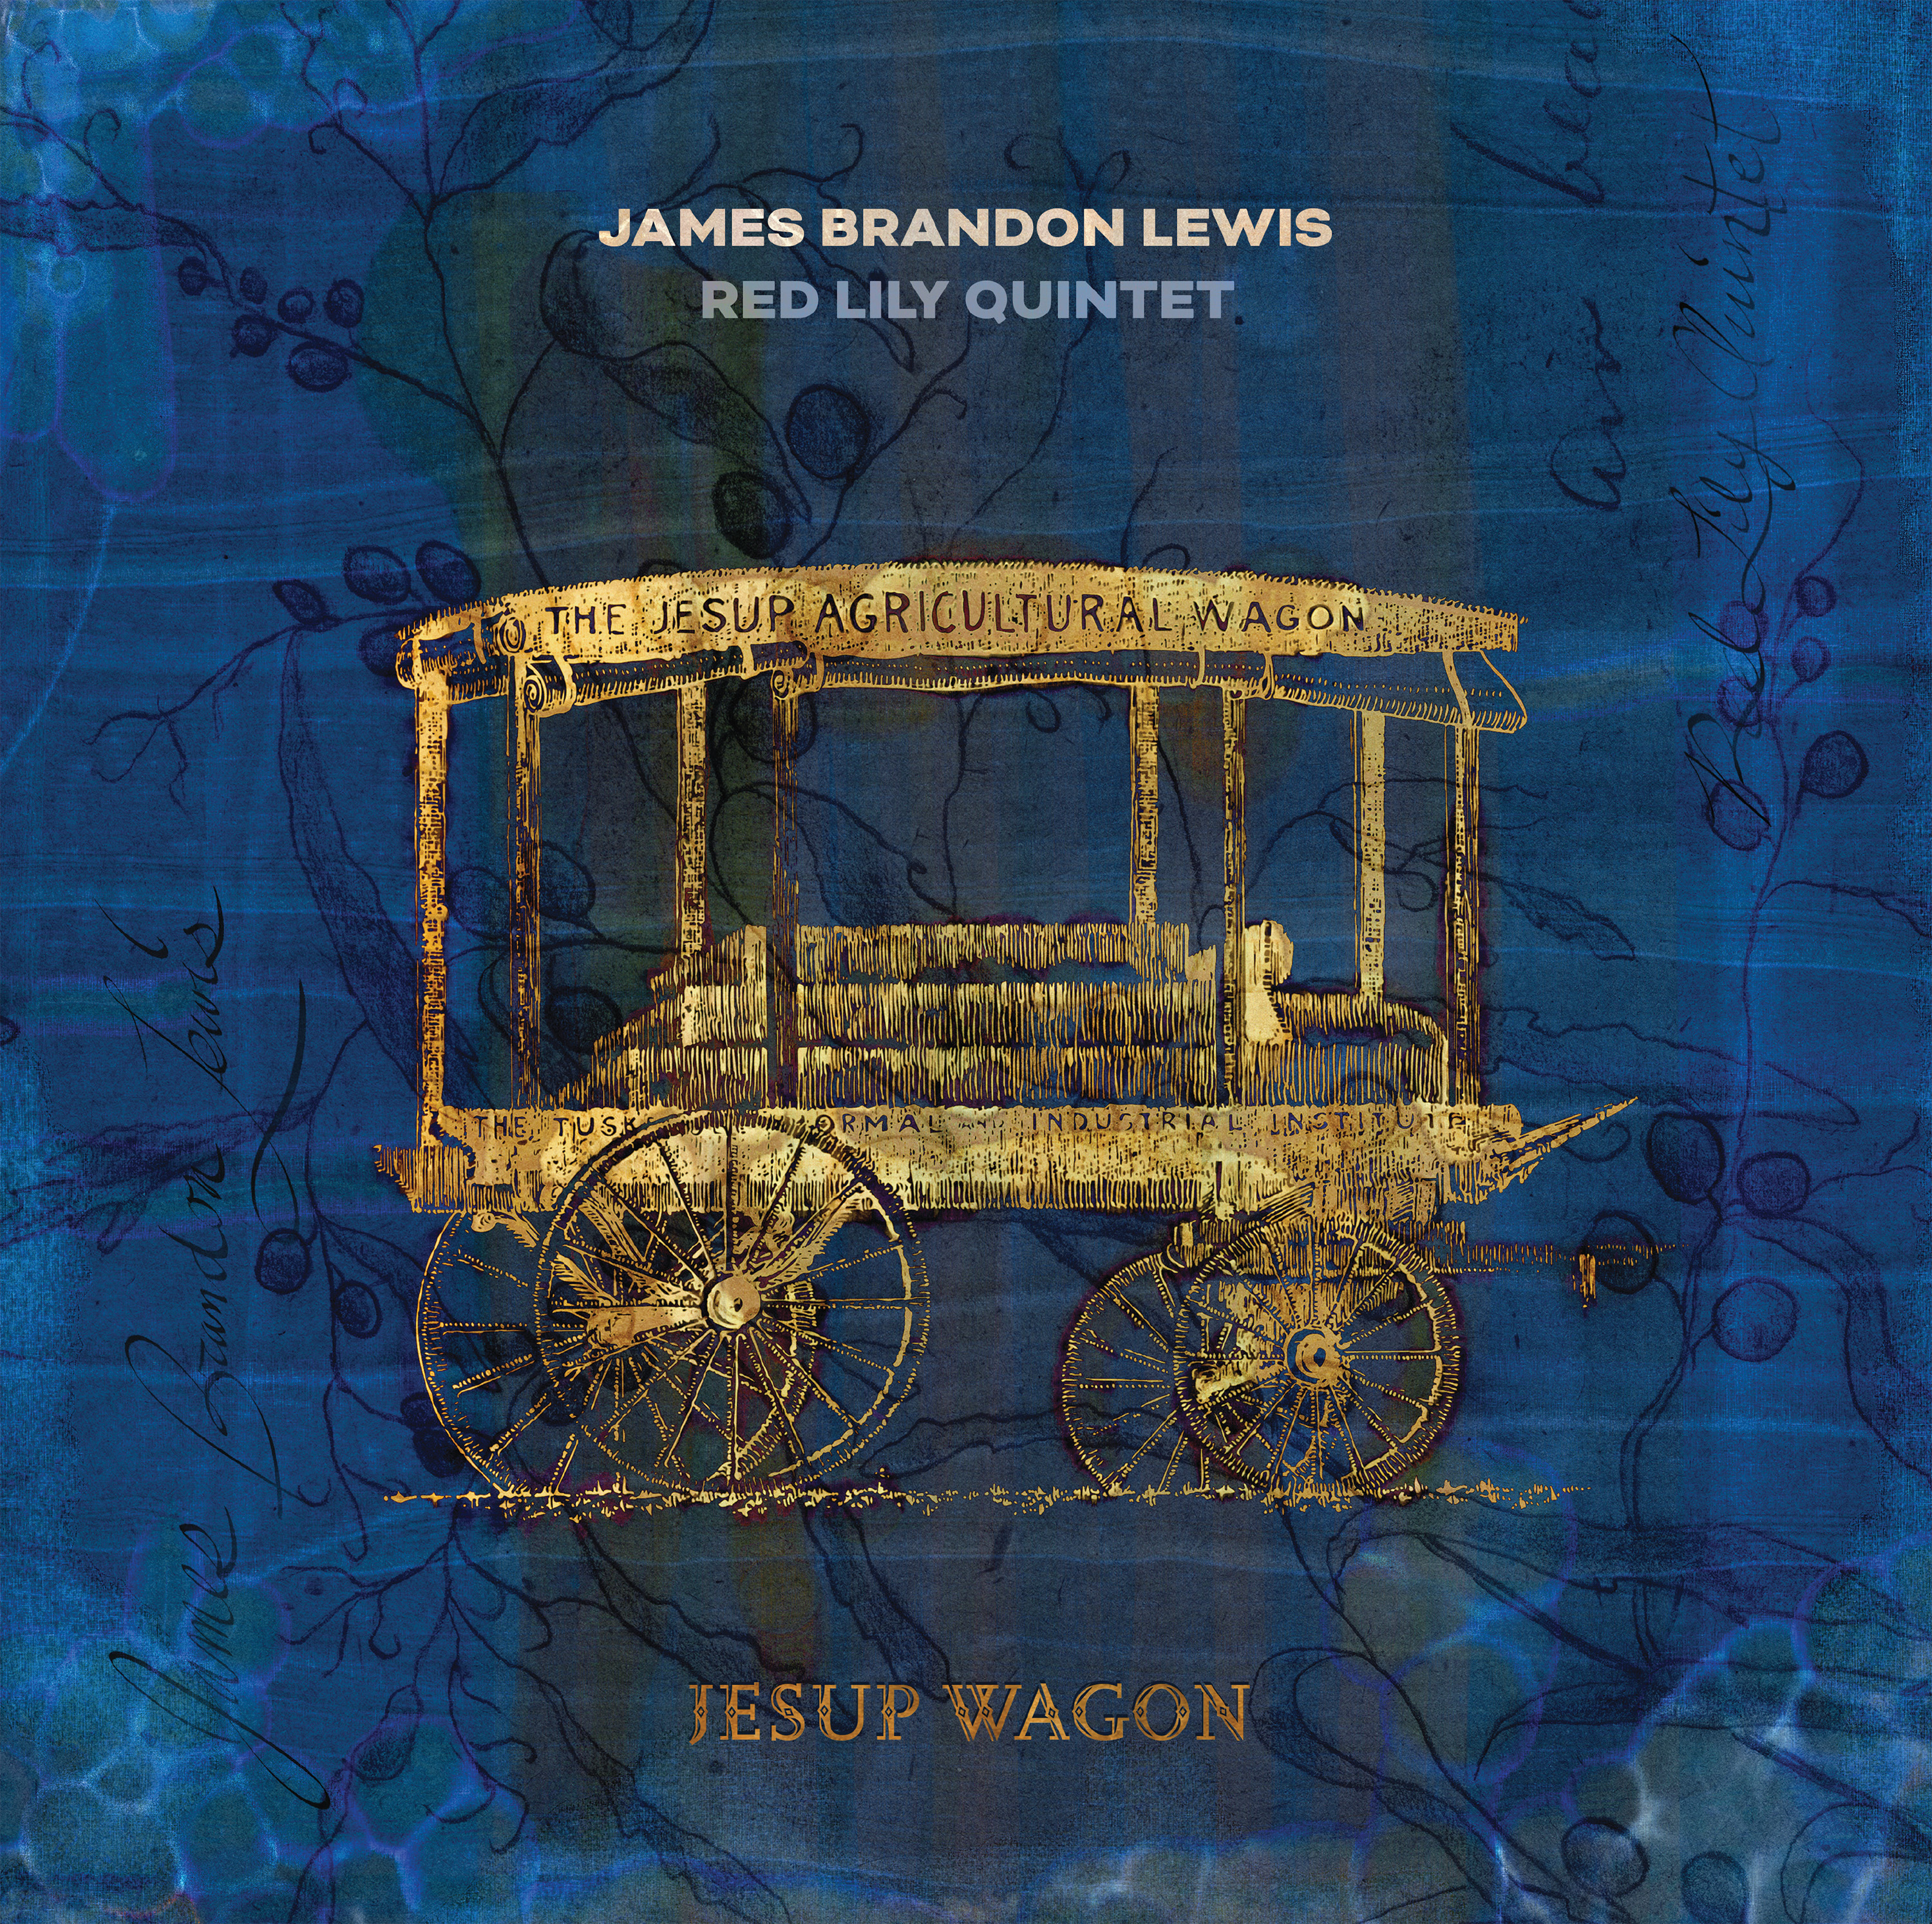 cover for the James Brandon Lewis Red Lily Quintet album Jesup Wagon